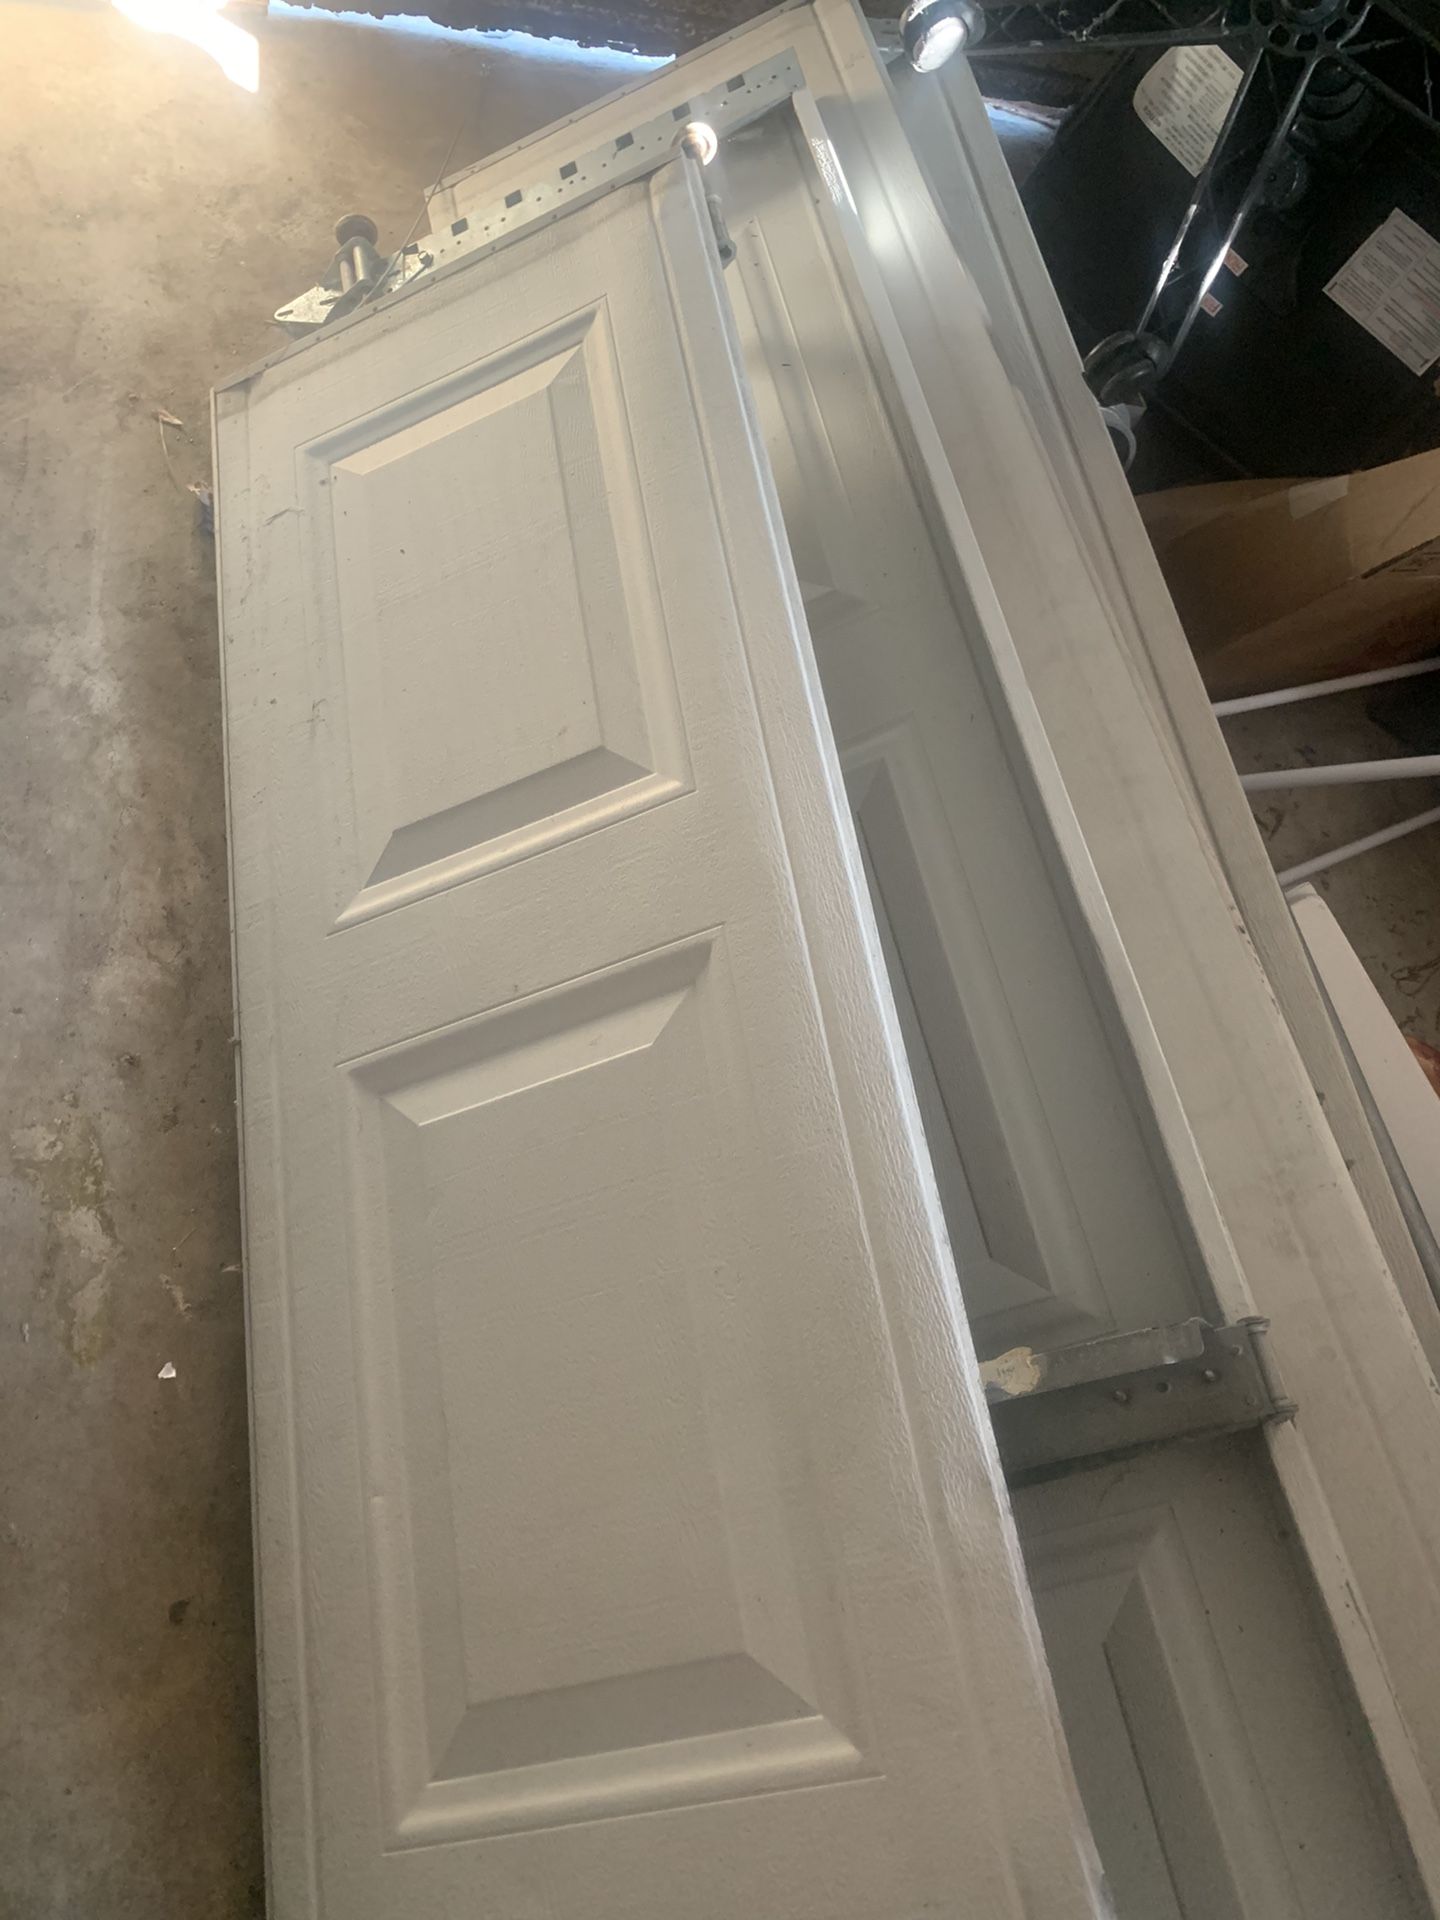 Large garage door: 9x7 and bolts etc